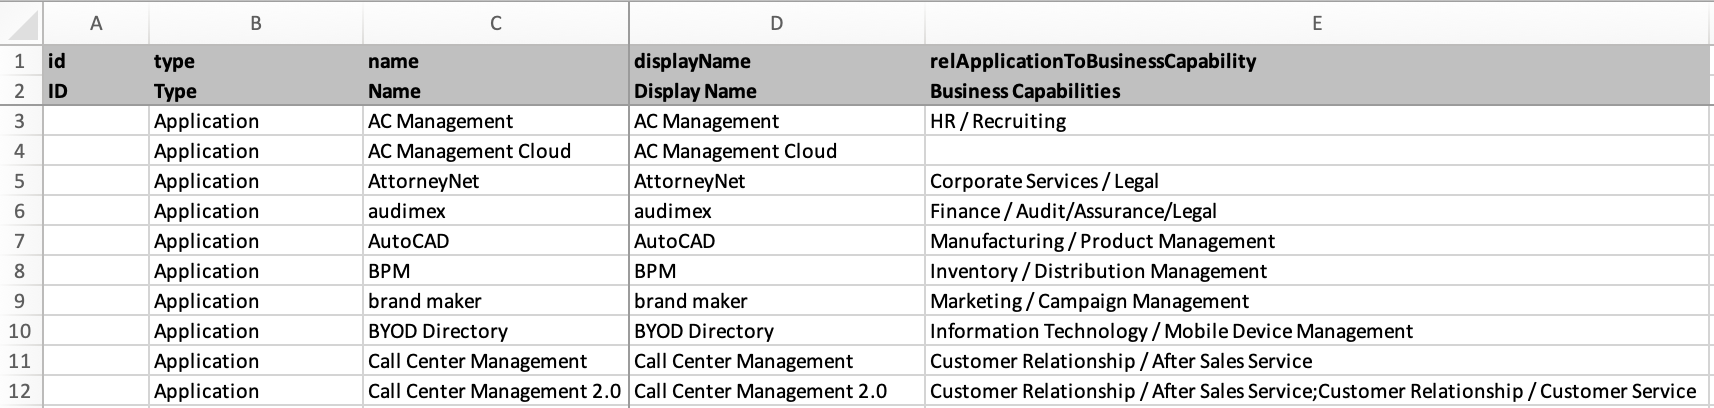 Business Capabilities linked to Applications using their full Display name